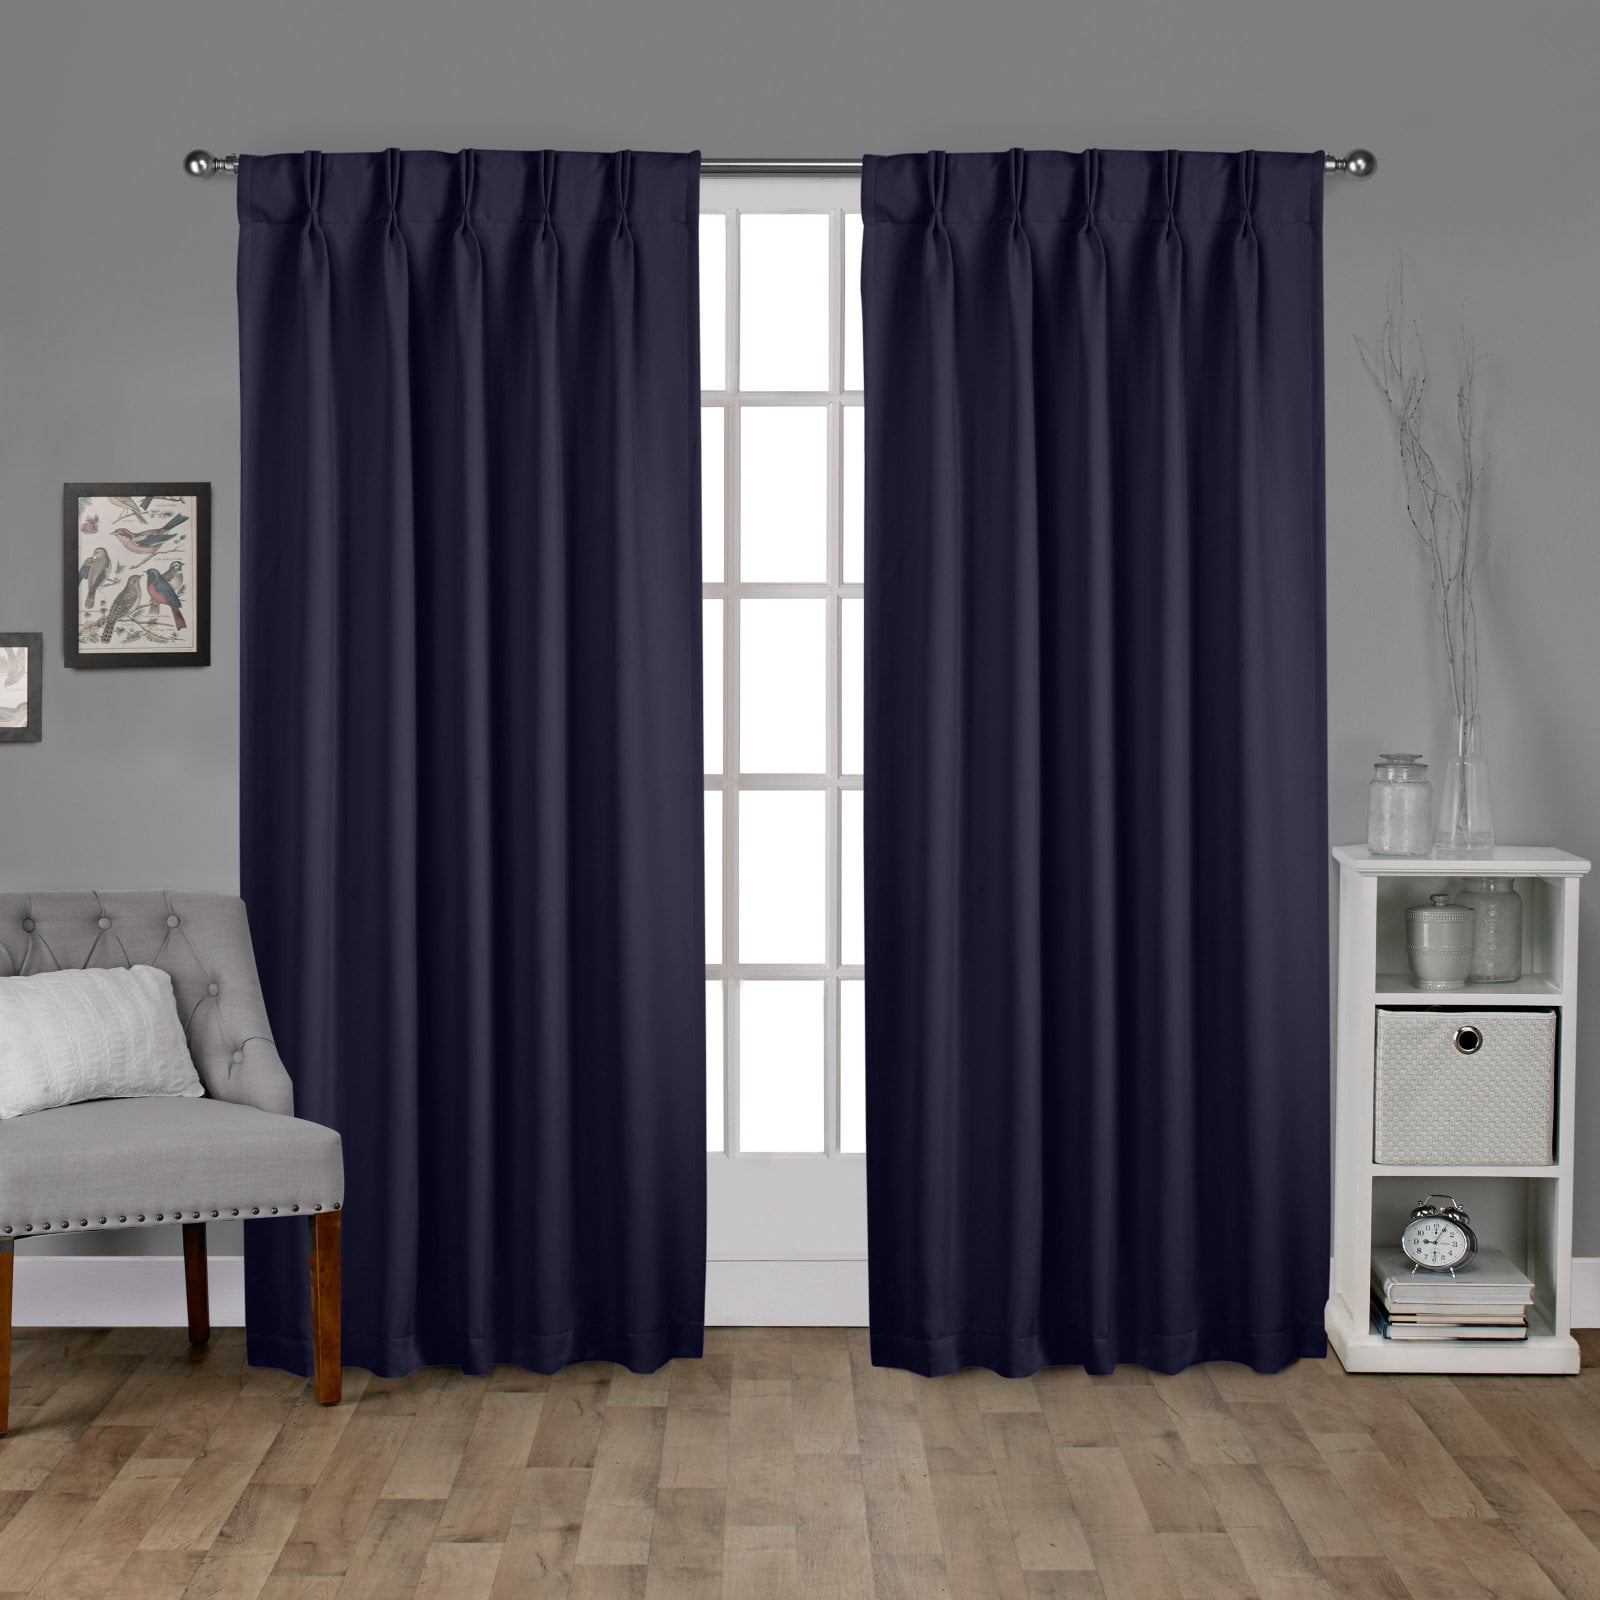 Pencil Pleat Fully Lined Jacquard Striped Curtains Blue Gold Grey Purple 